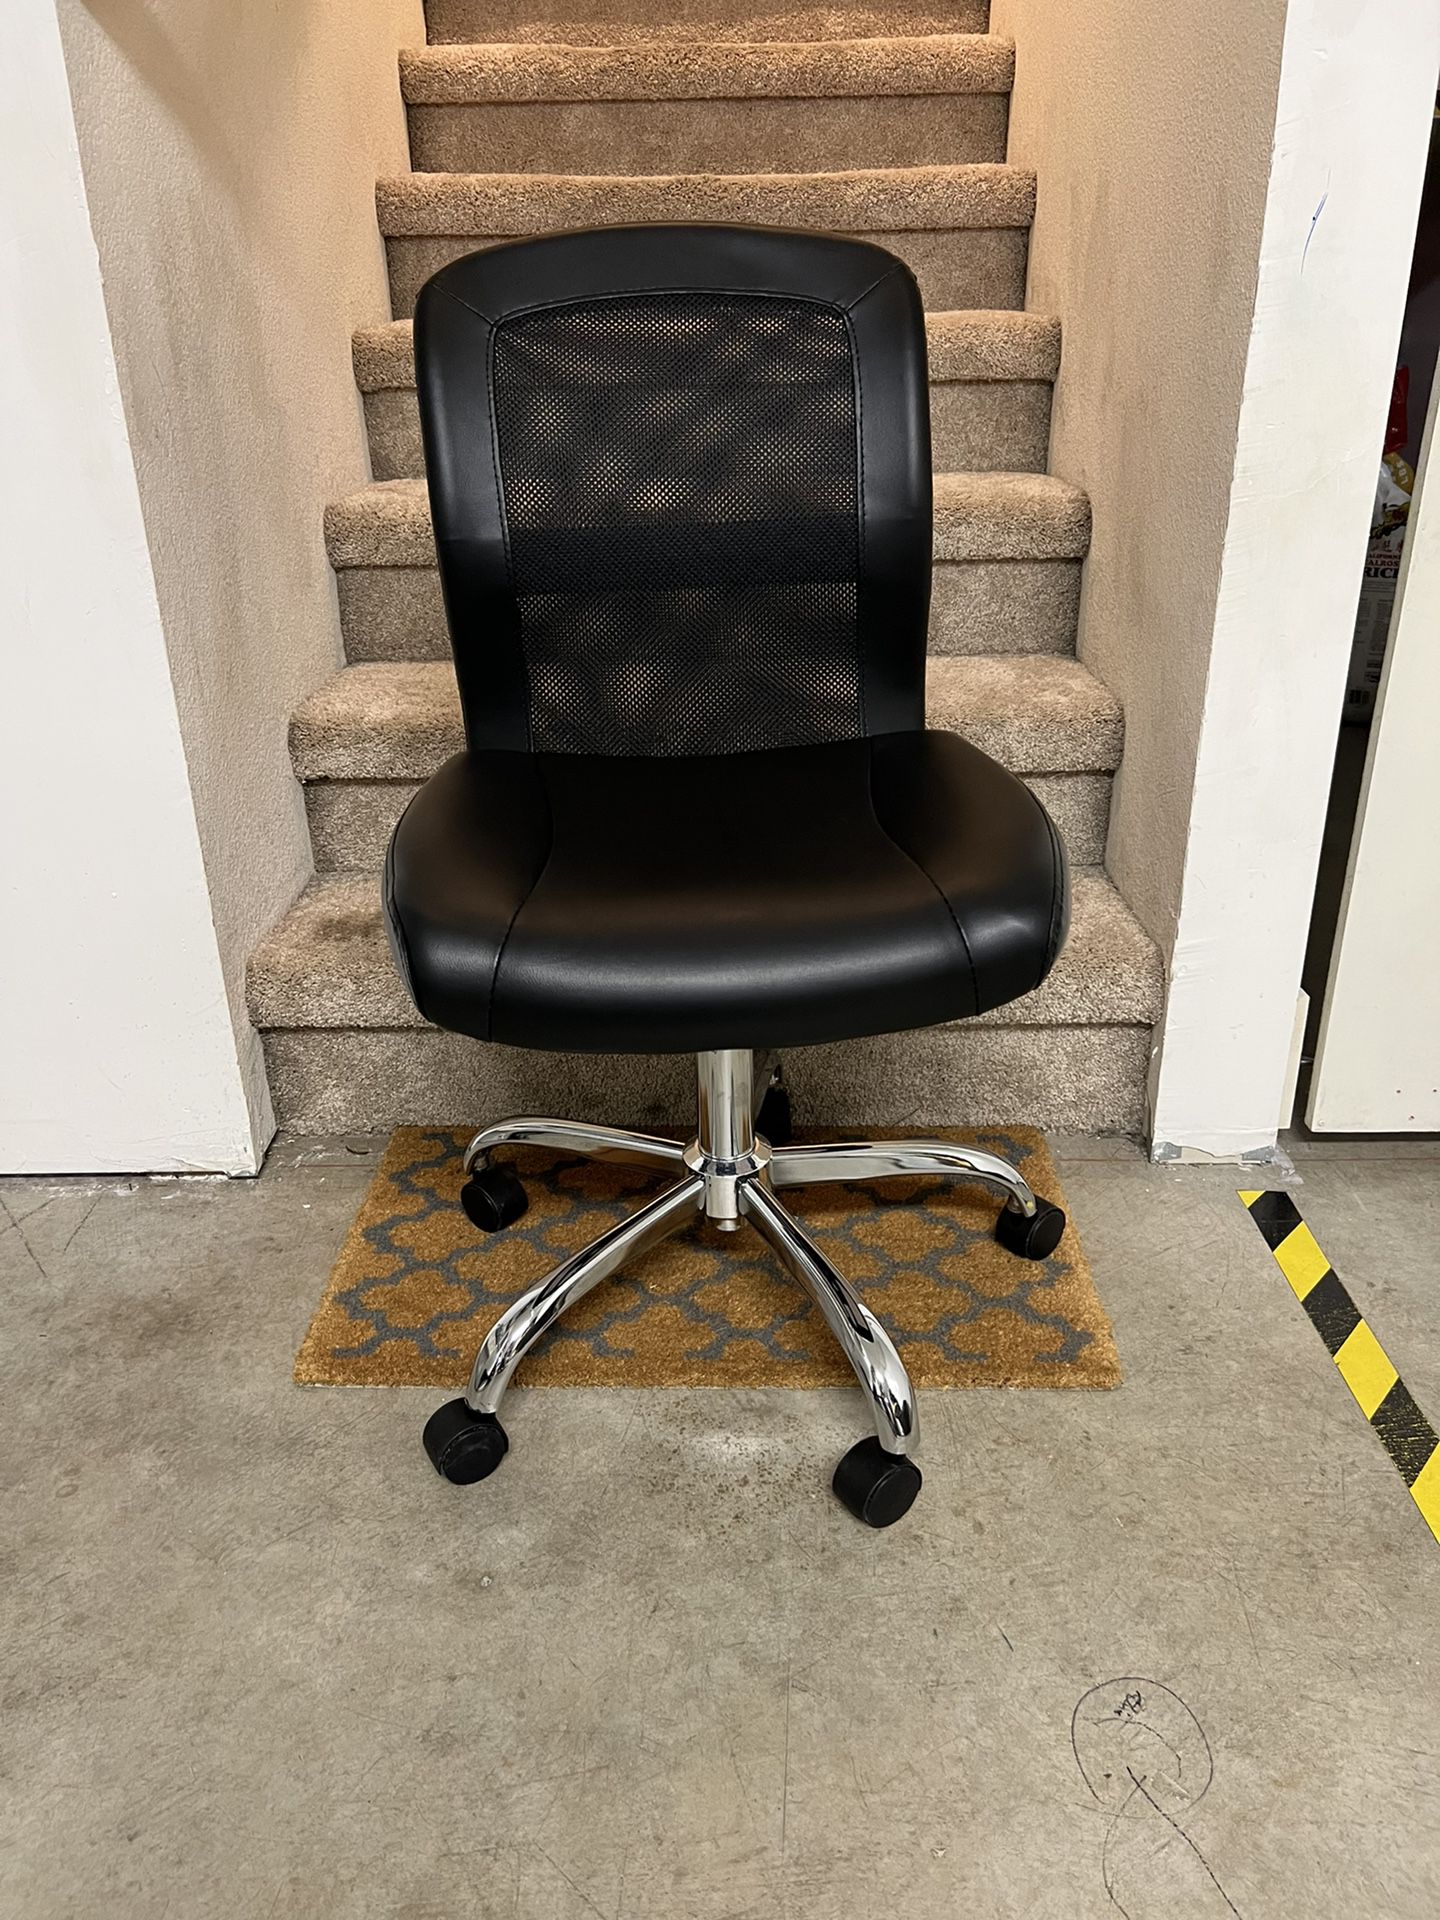 Adjustable Chair, 1 Month Old, Like New